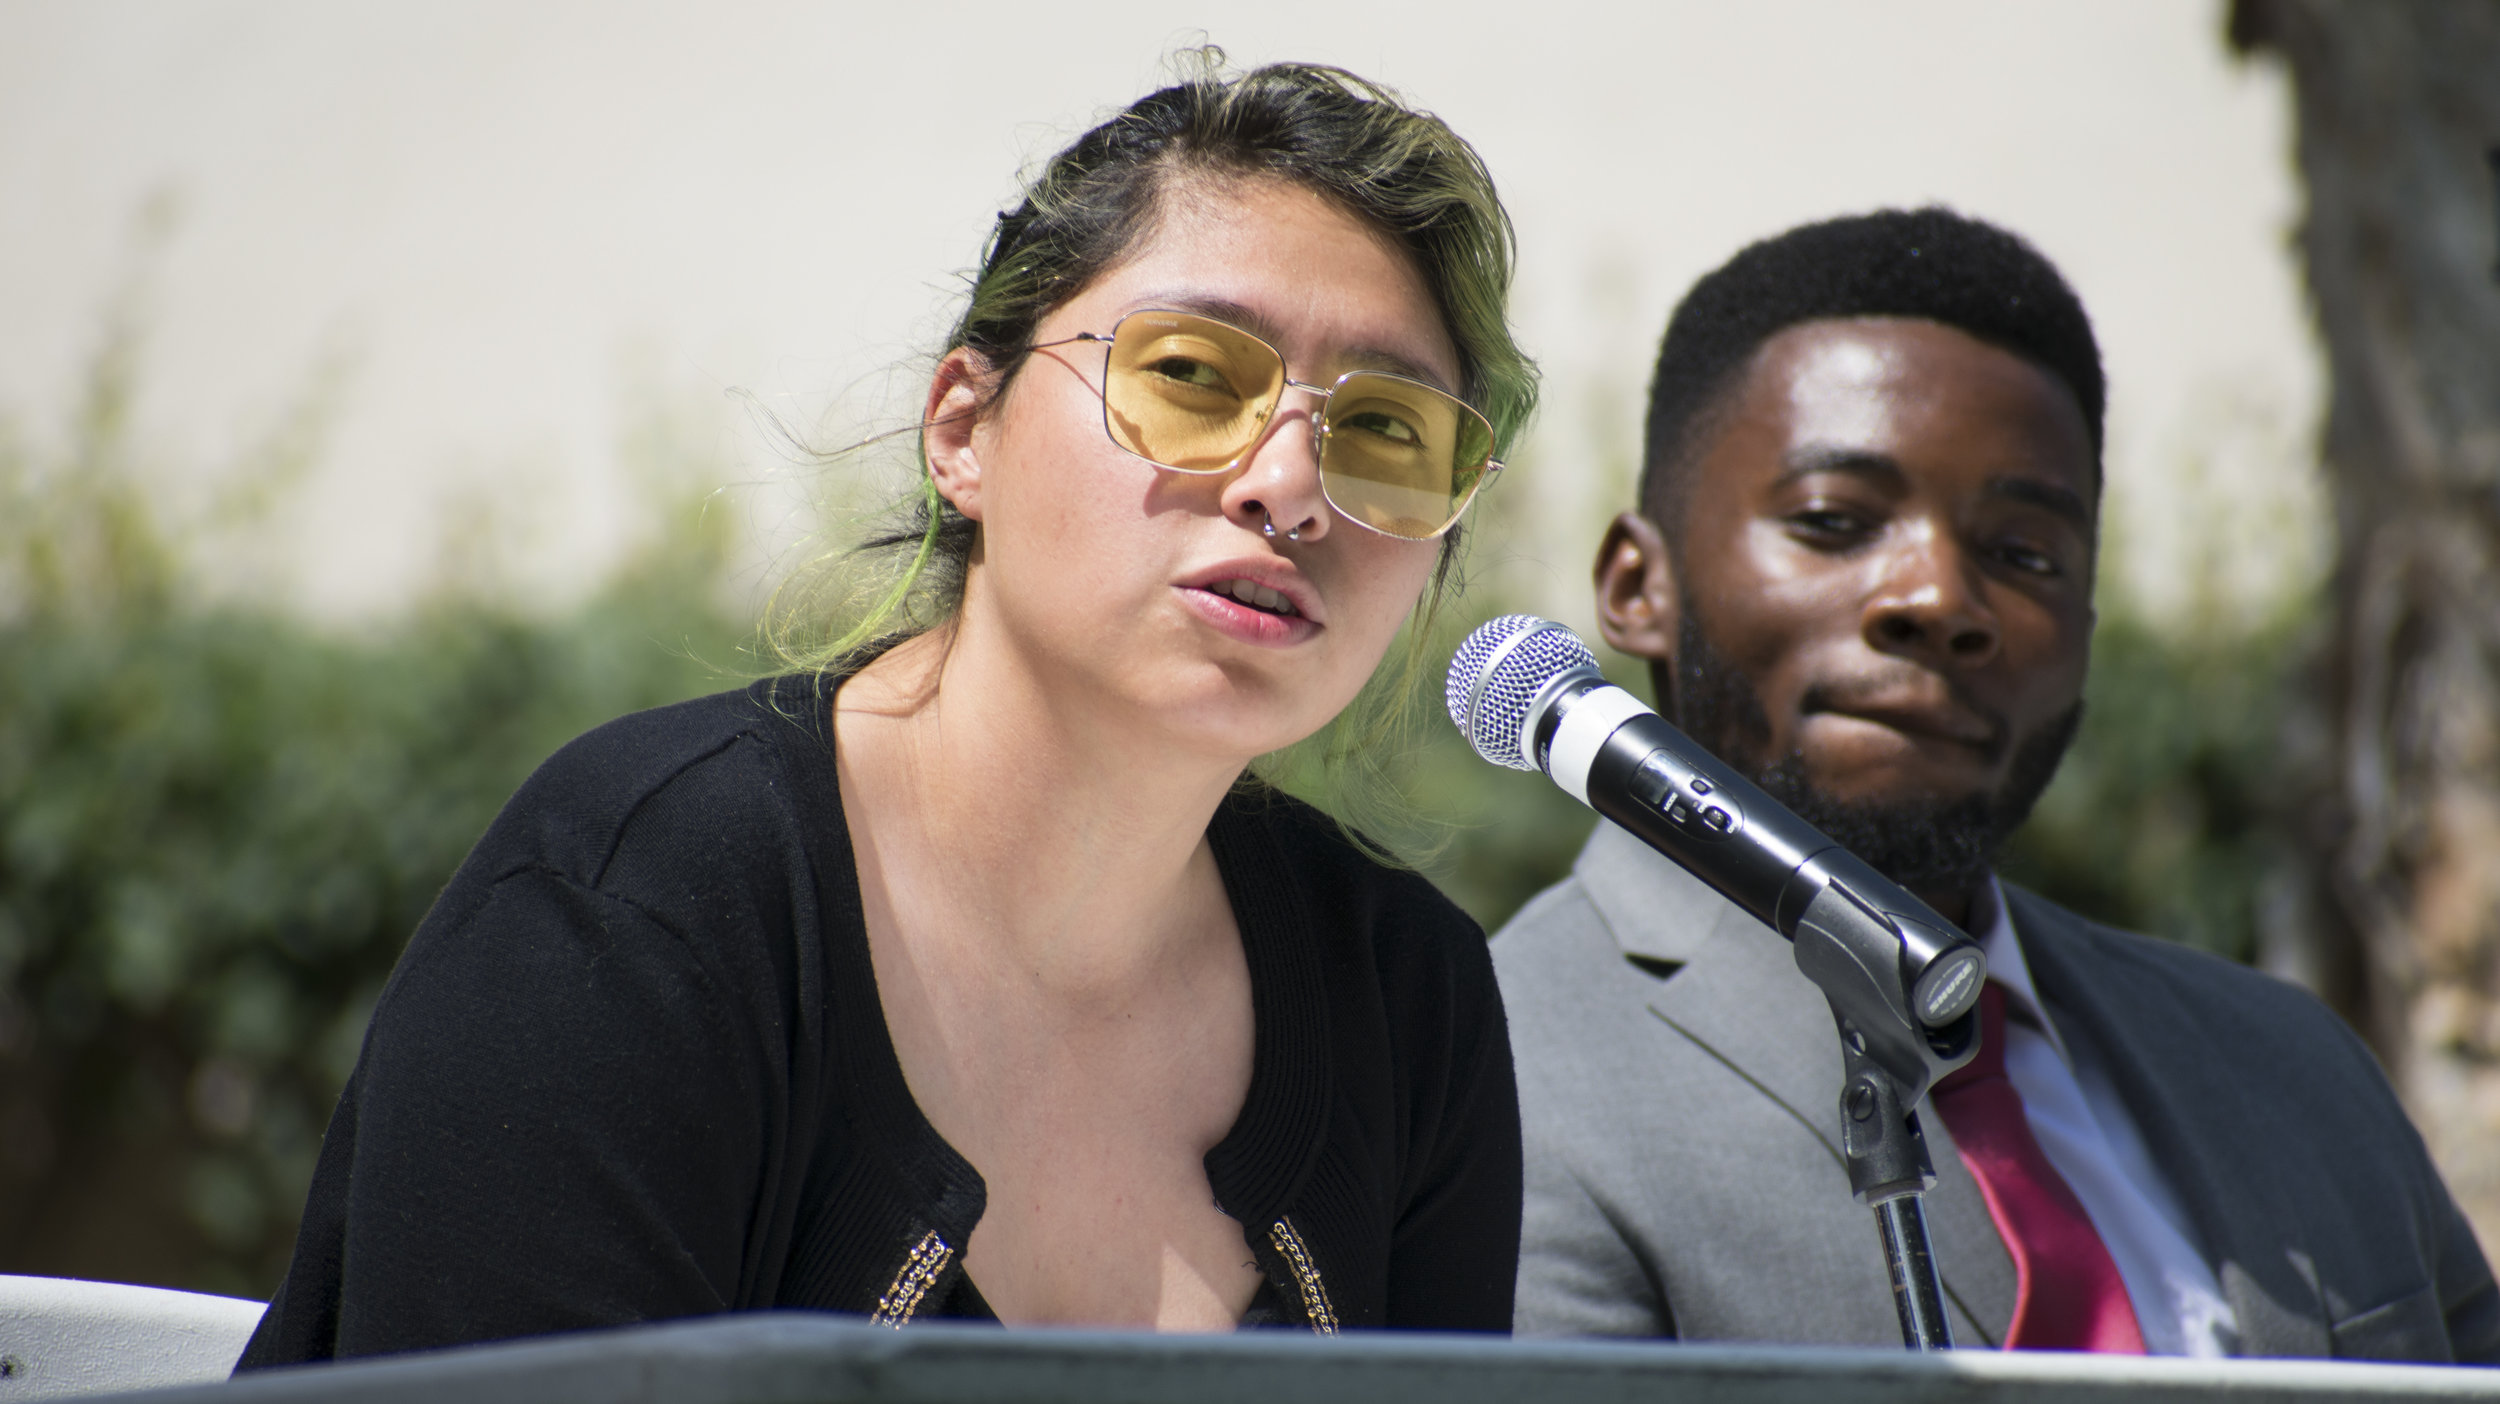  Alexa Benavente and Gosple Ofoegbu, both are running for the position of student advocacy on the Associated Students of Santa Monica College board and answer questions about their position during a forum to give candidates running for the election a